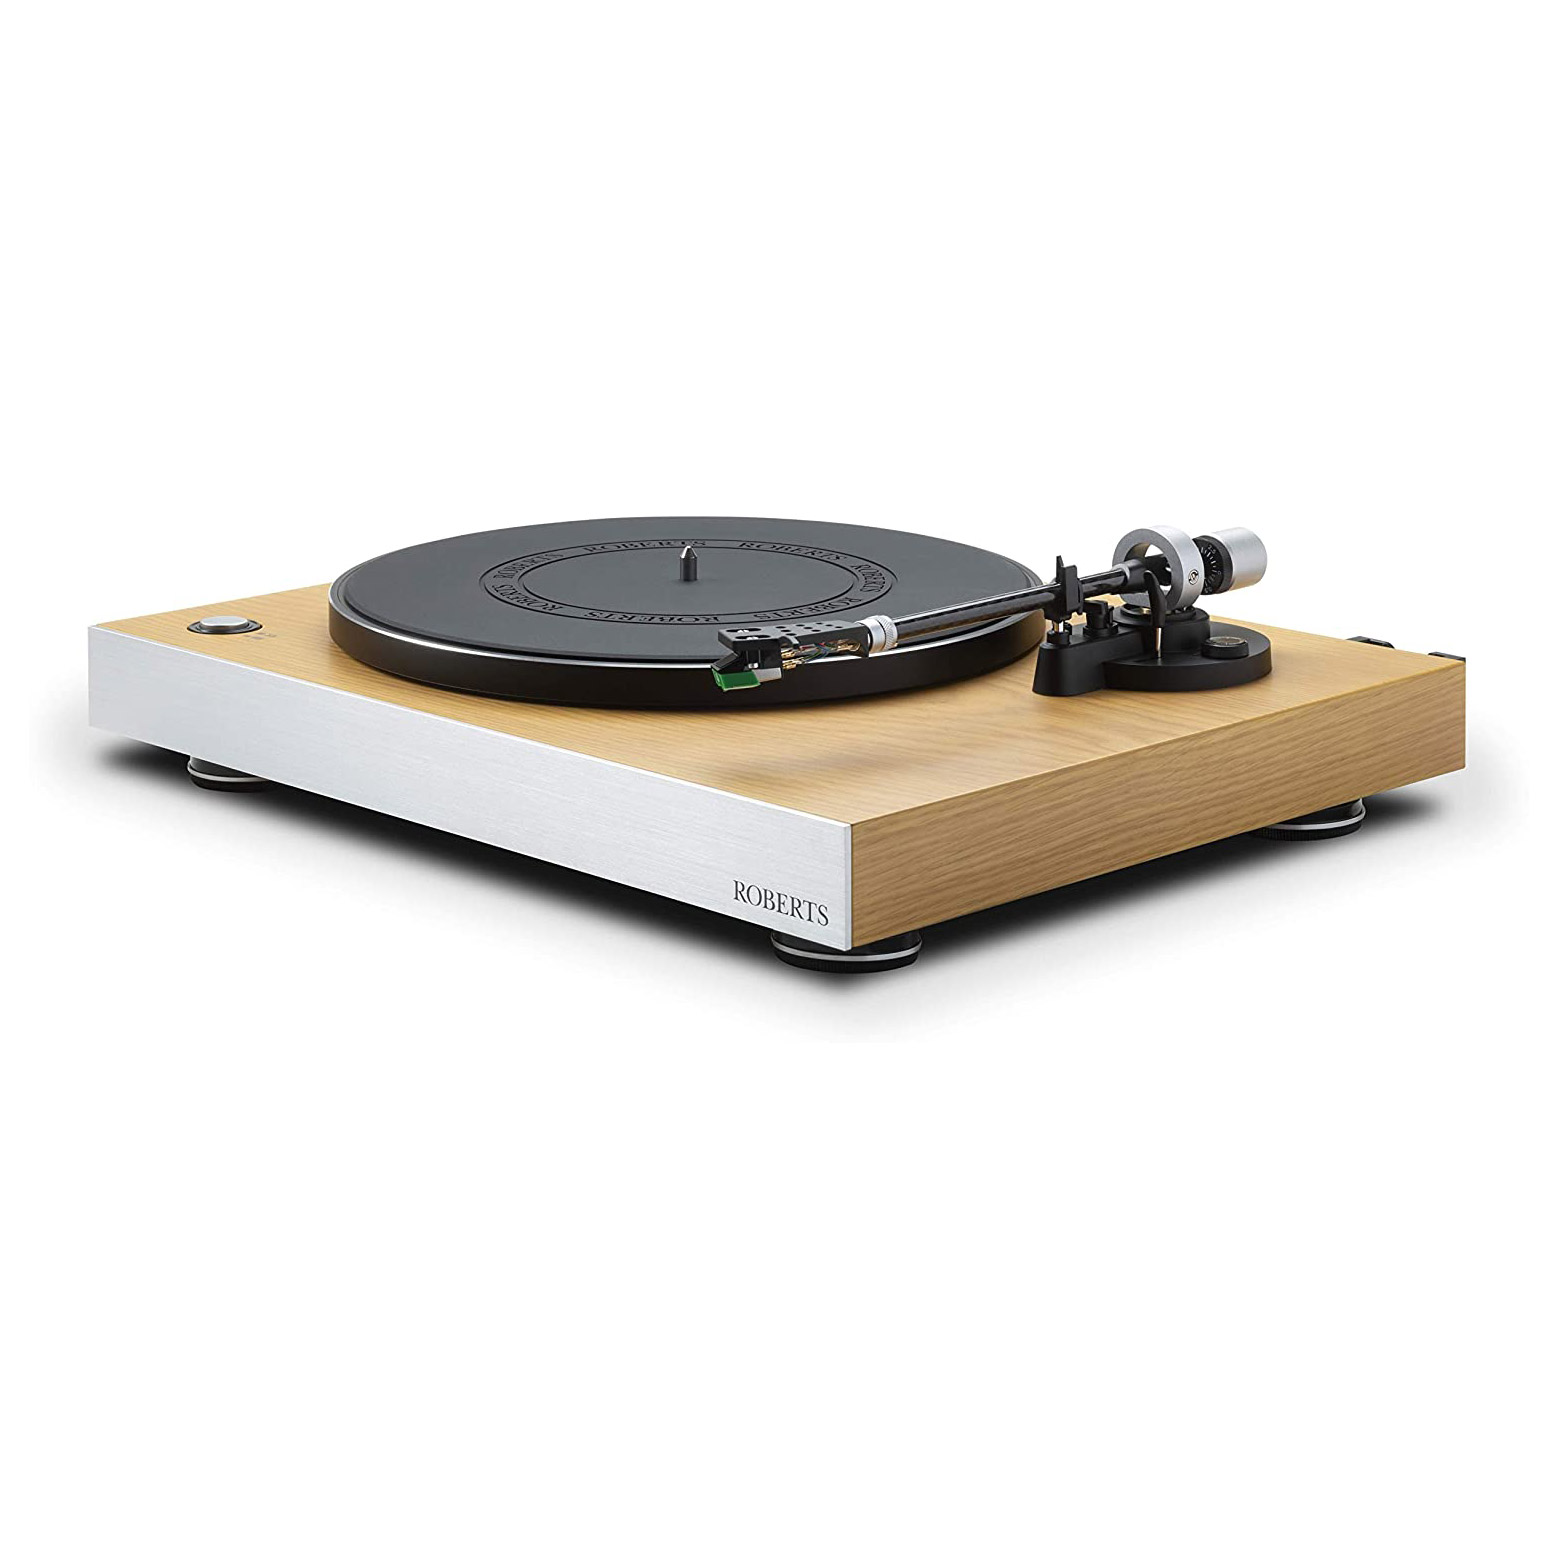 Image of Roberts RT200 Turntable with Built In EQ USB Direct Drive Motor